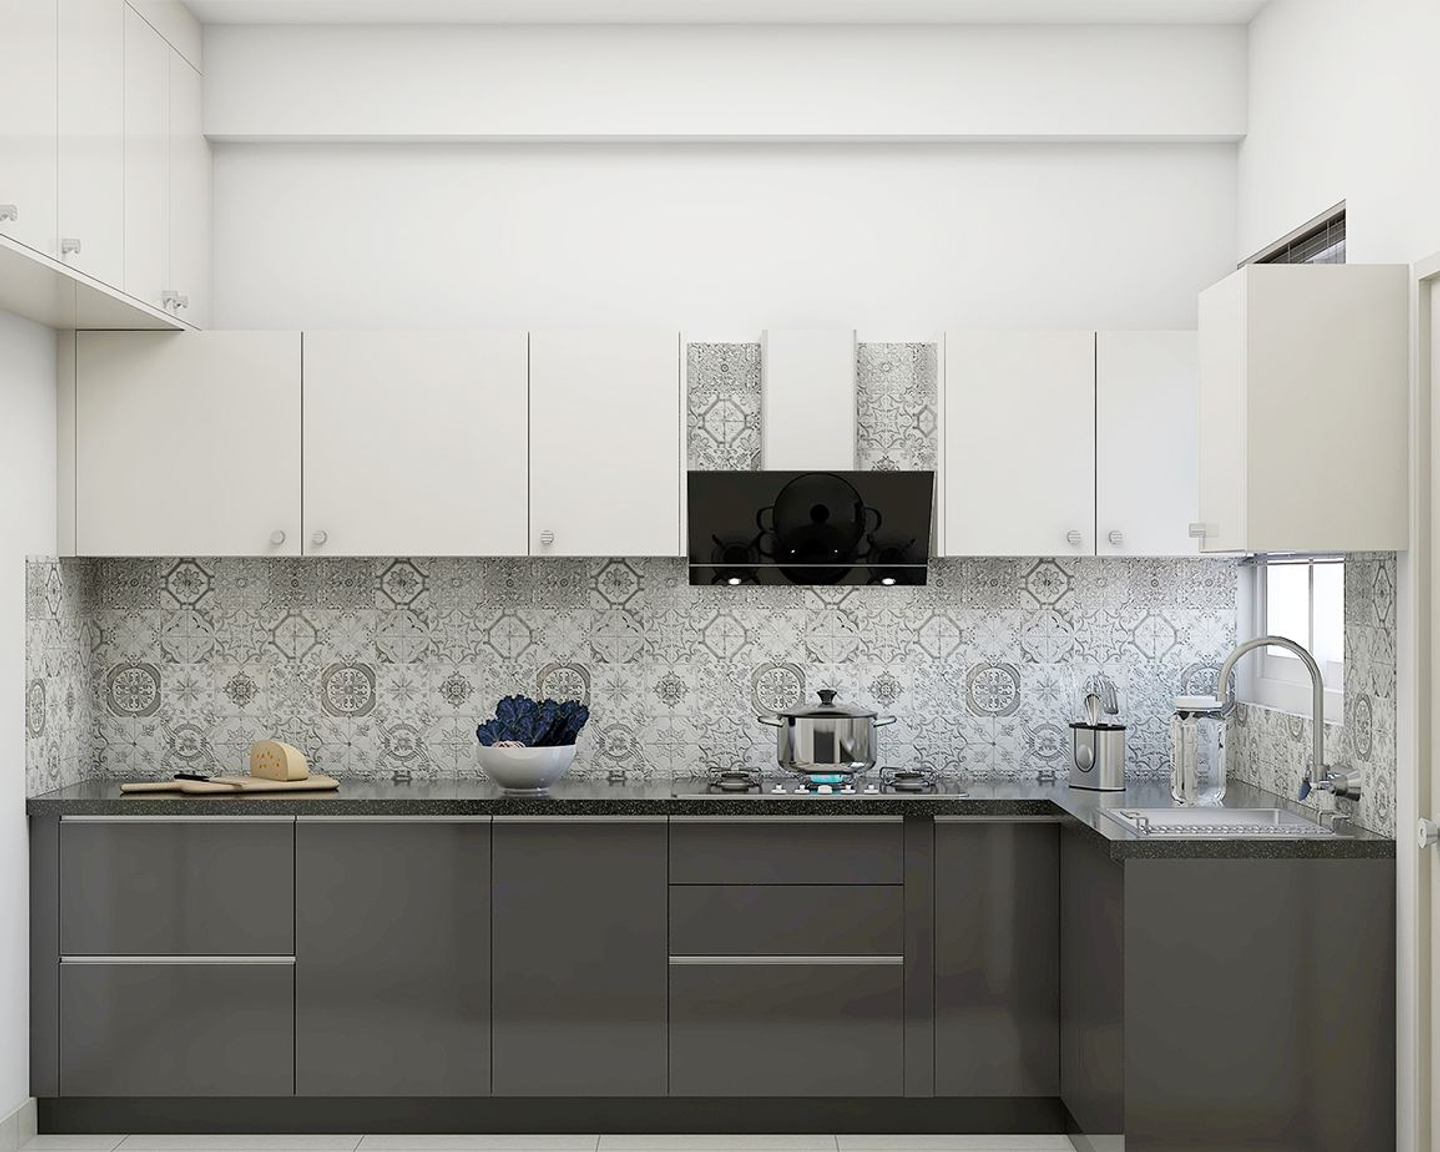 L-Shaped Kitchen In Grey And White - Livspace